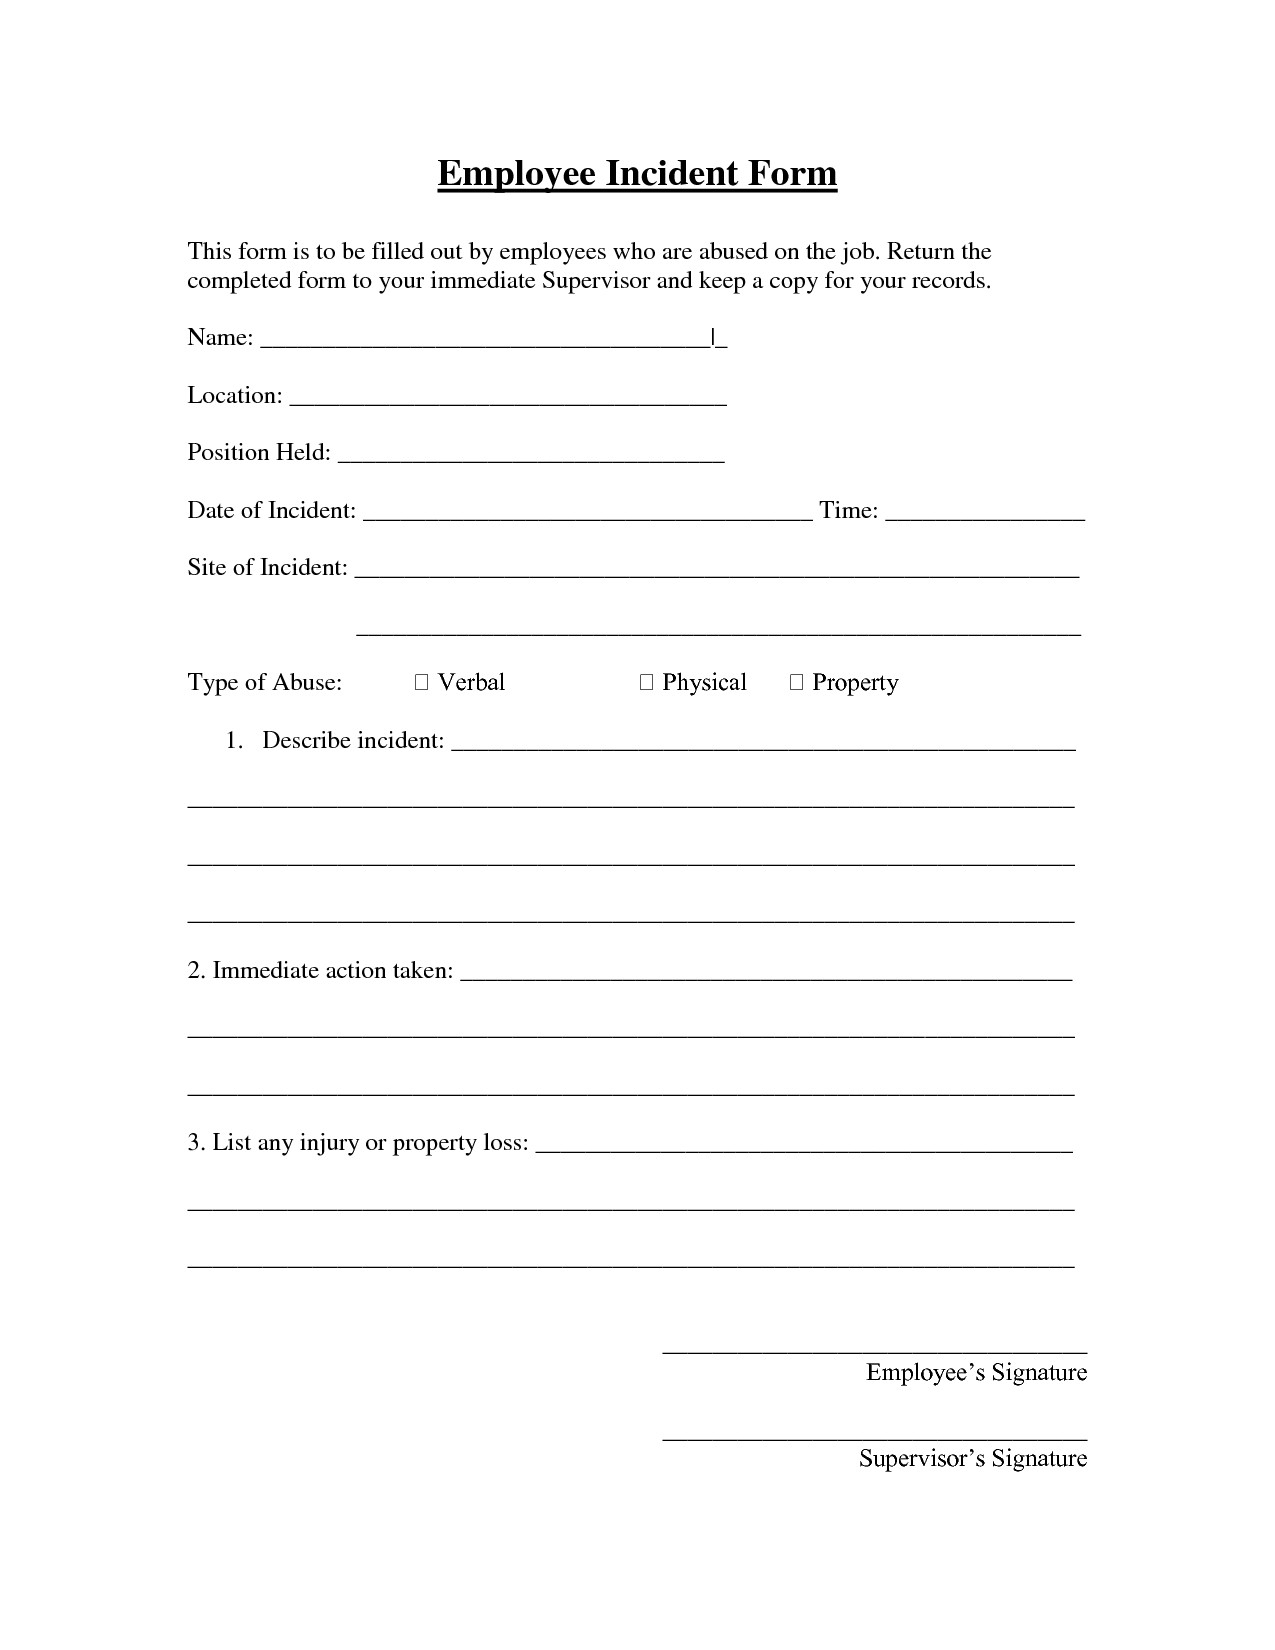 Police Incident Report Form Png V 1 Provided That Hr In Incident Report Form Template Doc